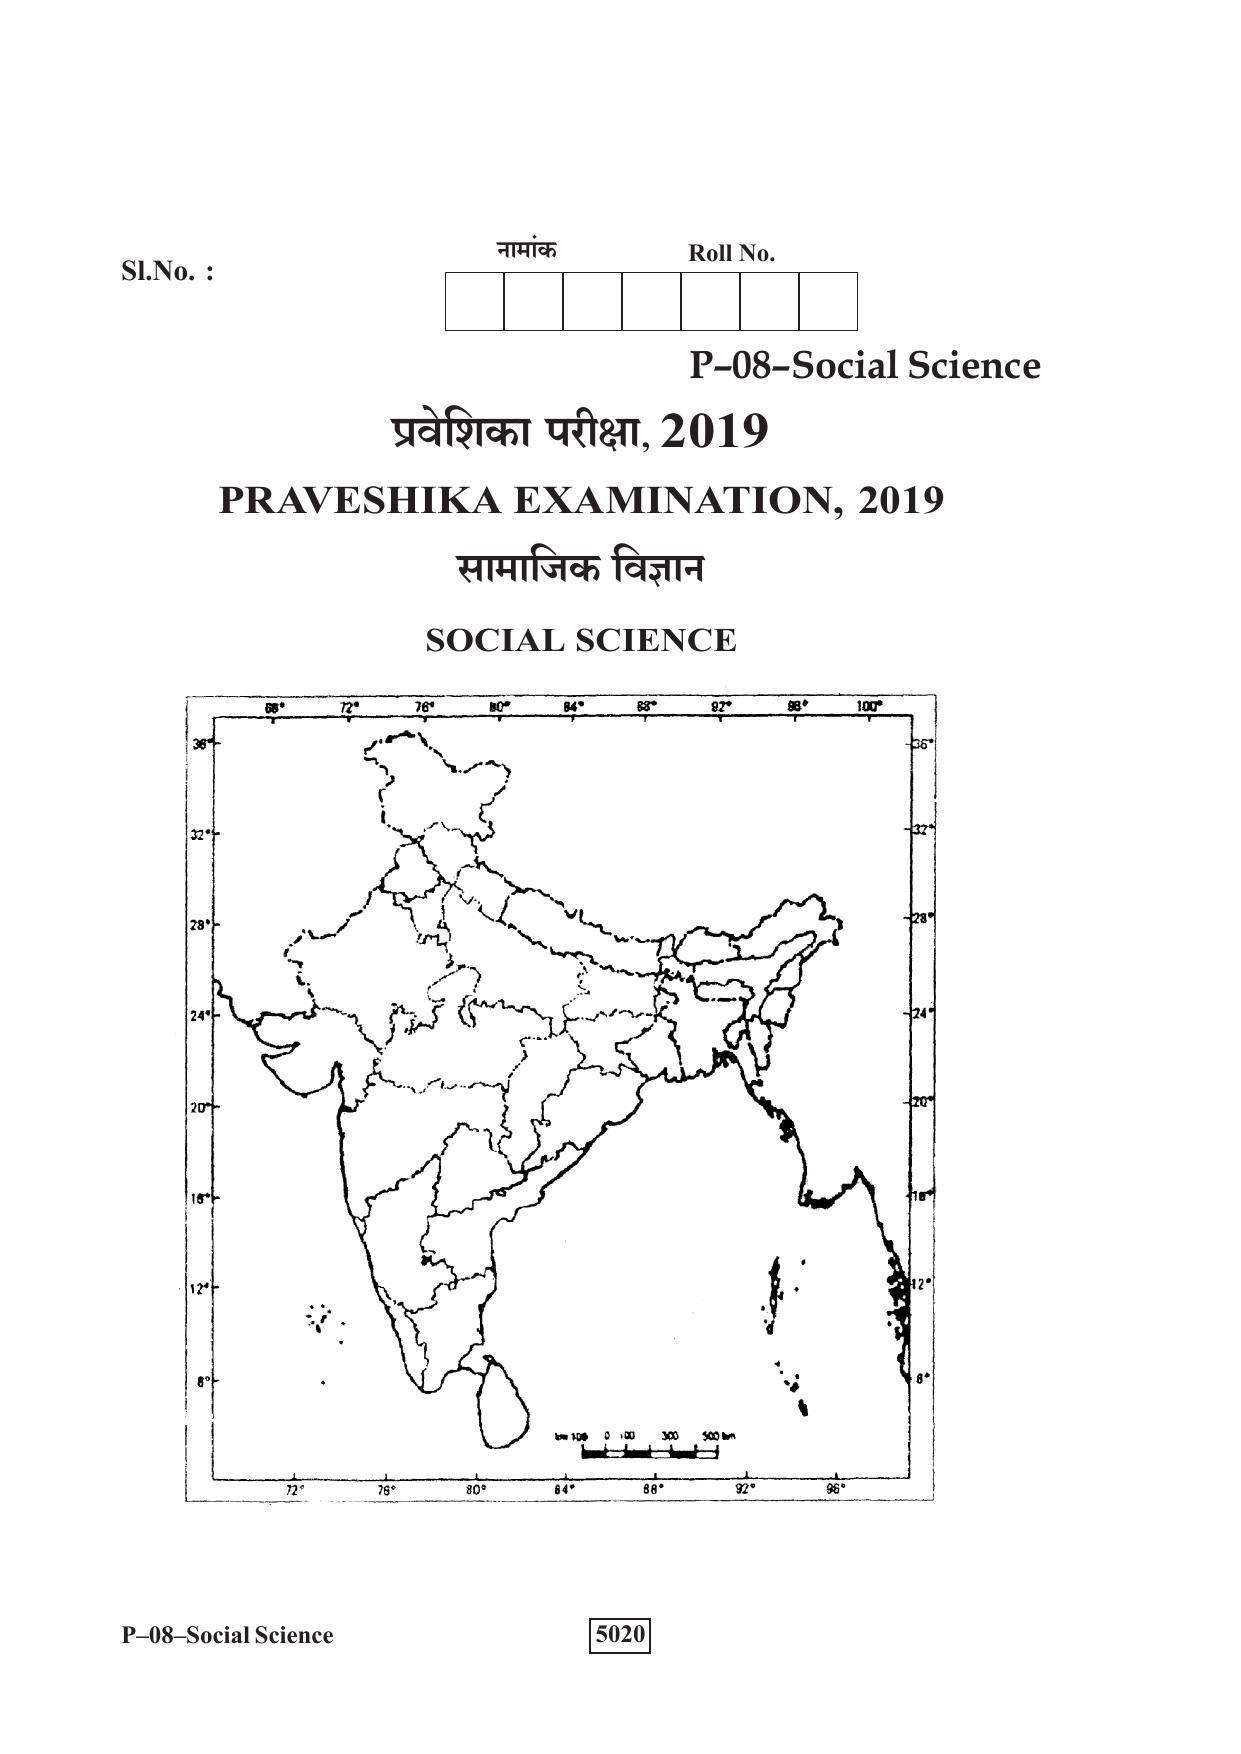 RBSE 2019 Social Science Praveshika Question Paper - Page 9